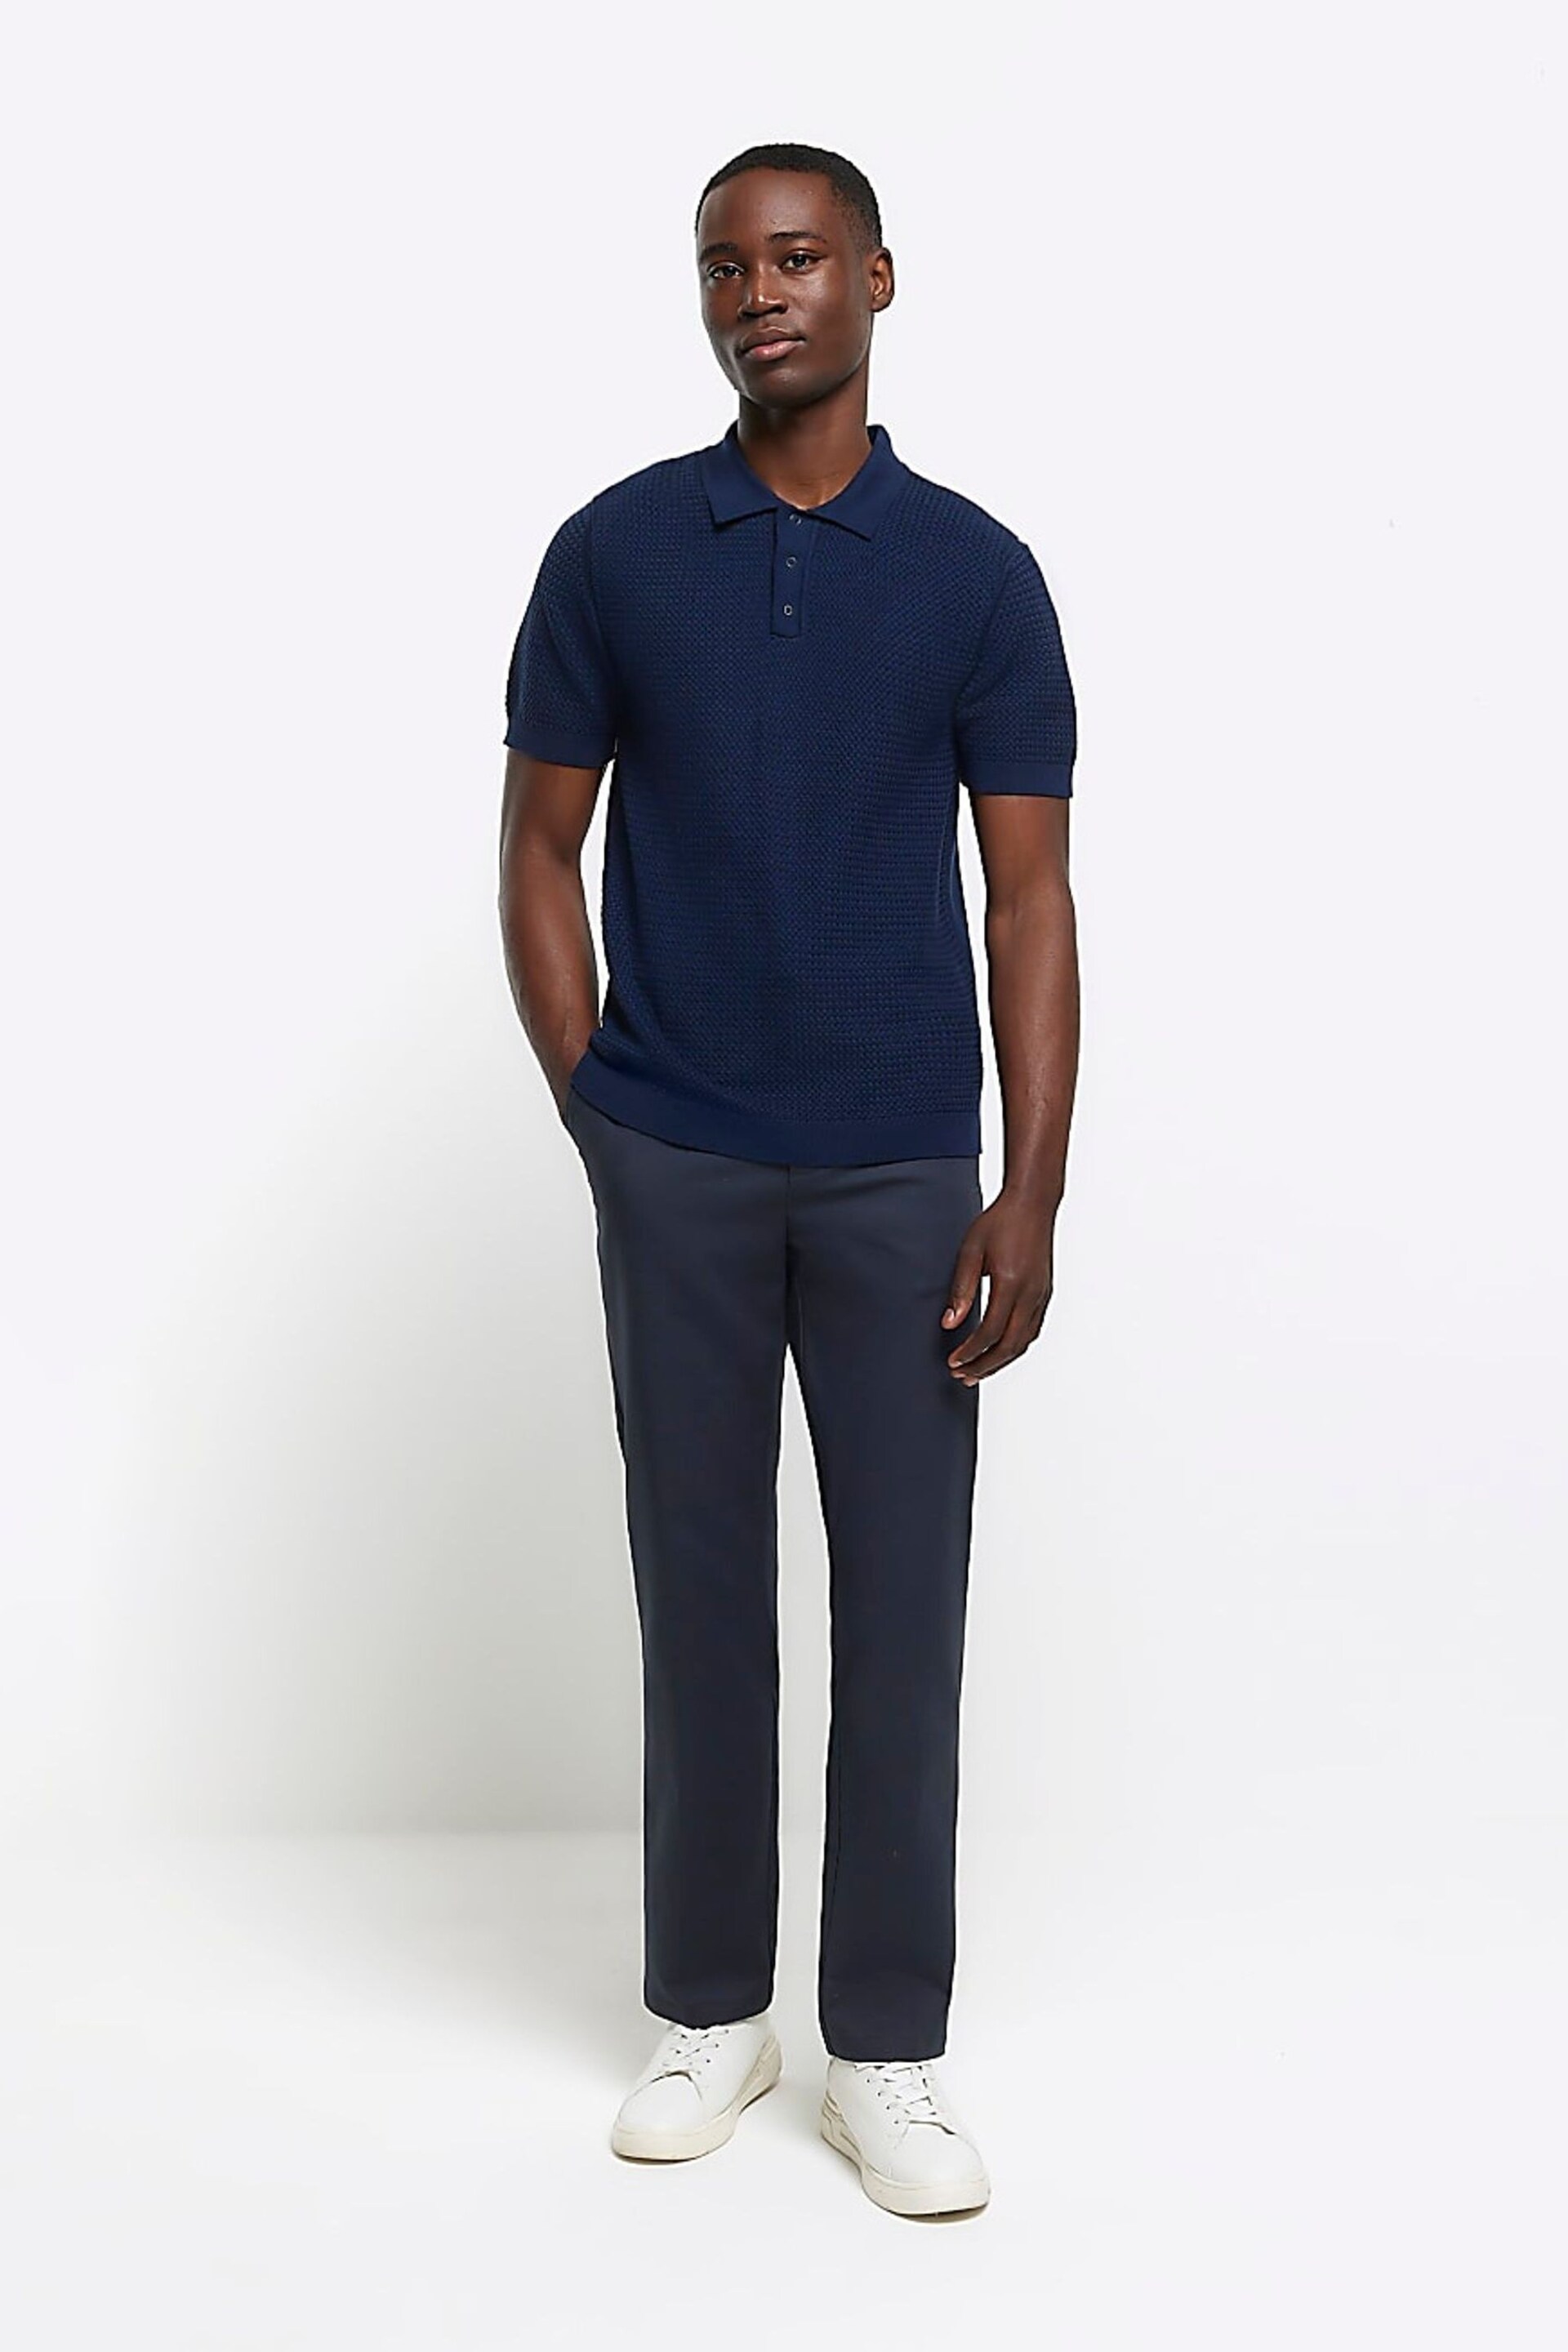 River Island Blue Textured Knitted Polo Shirt - Image 1 of 6